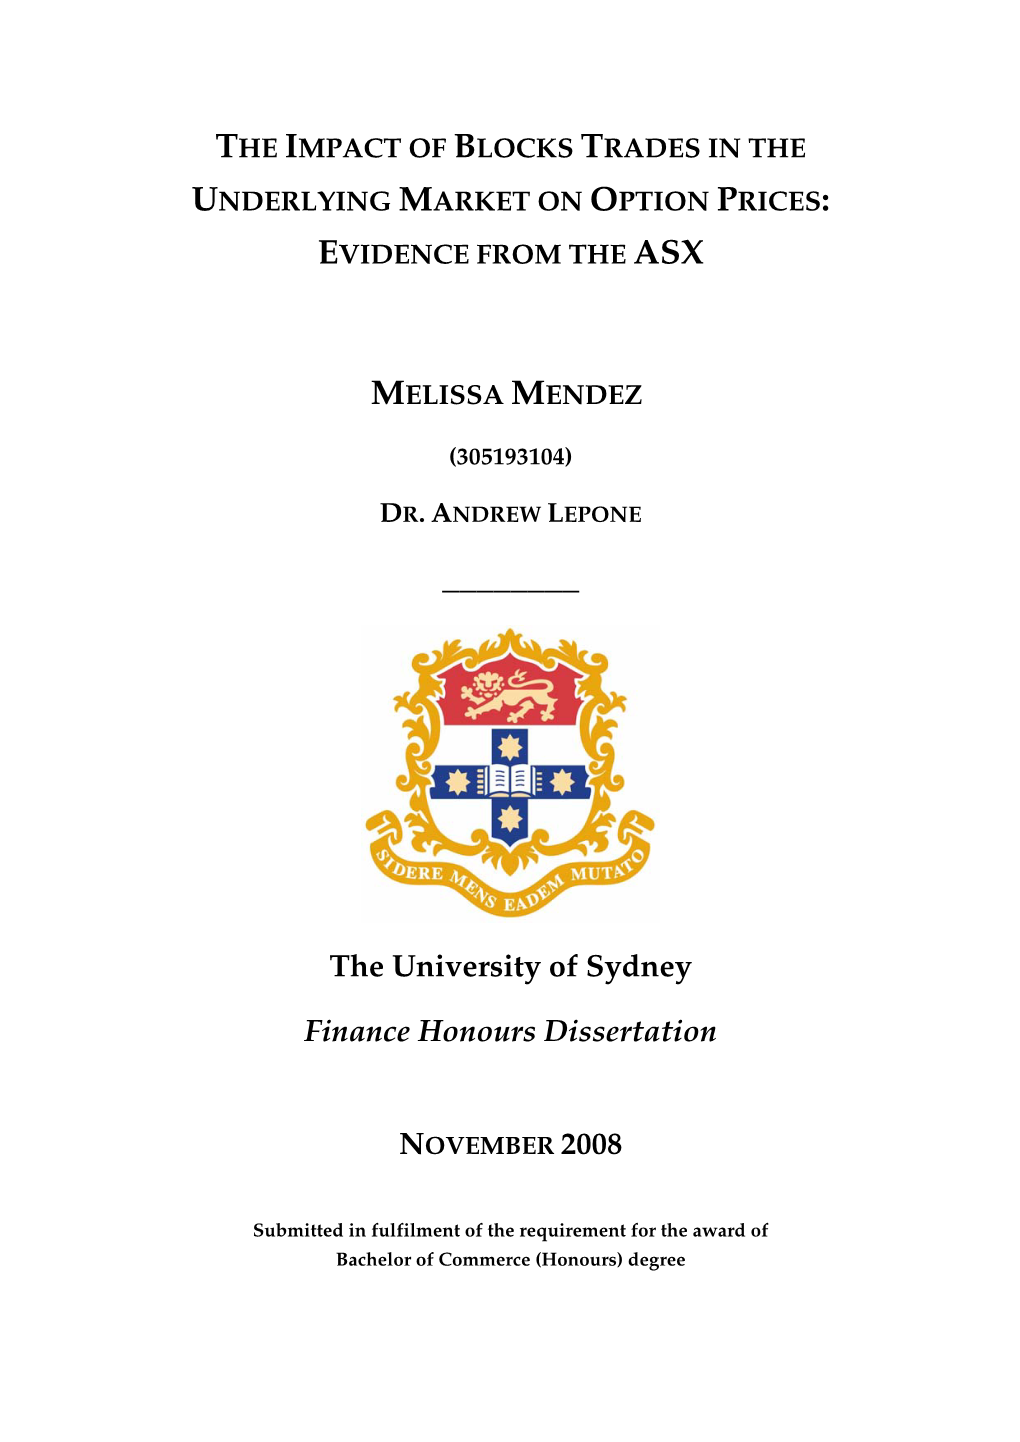 The Impact of Blocks Trades in the Underlying Market on Option Prices: Evidence from the Asx